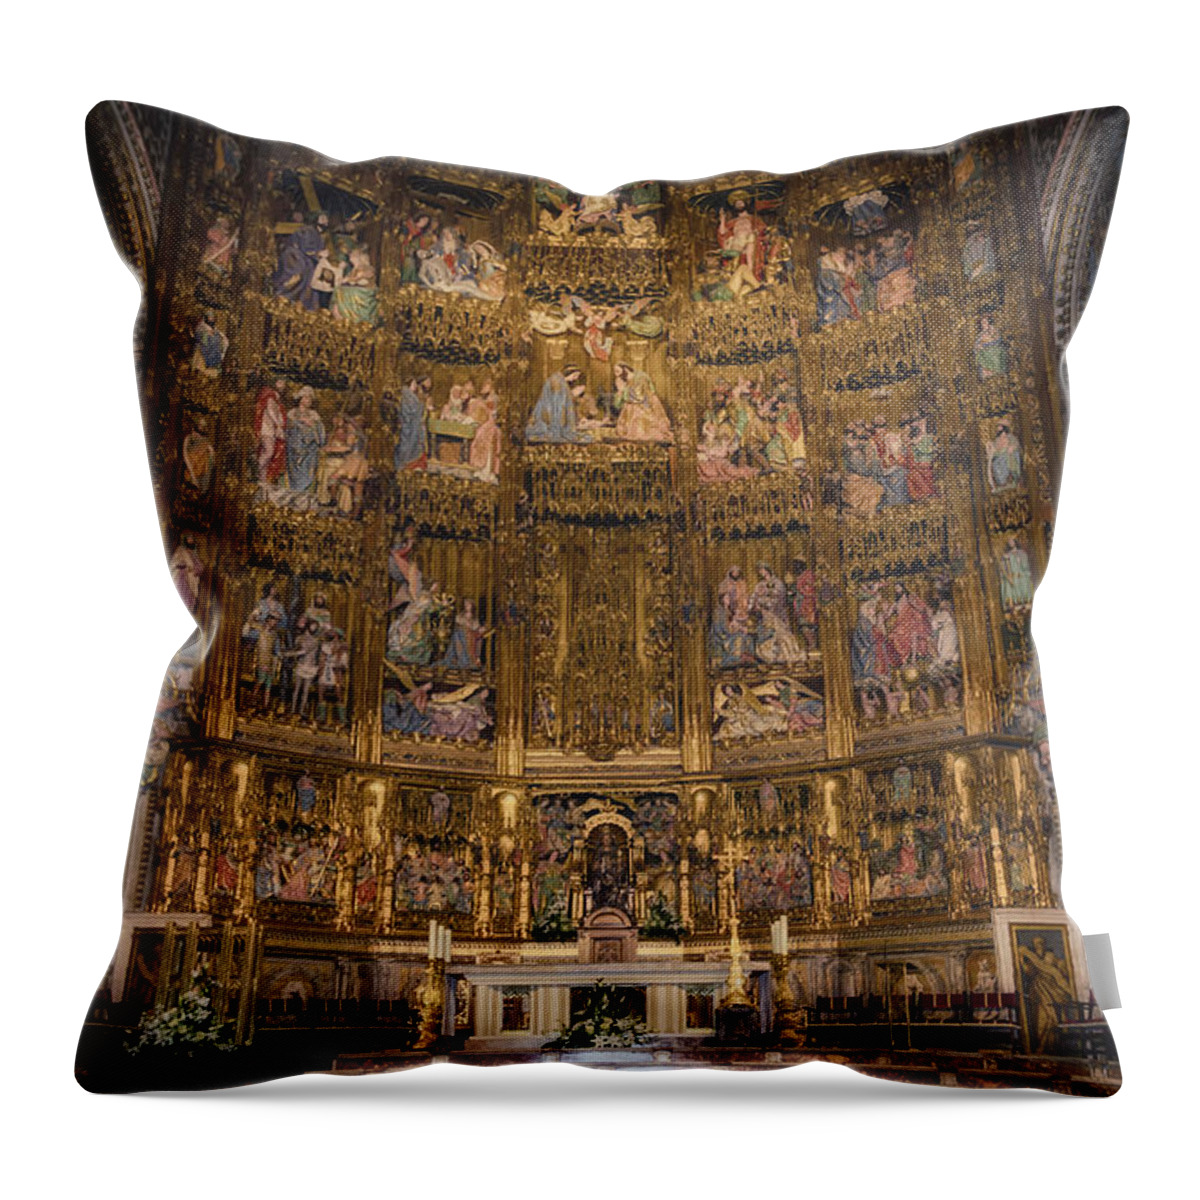 Toledo Throw Pillow featuring the photograph Gothic Altar Screen by Joan Carroll